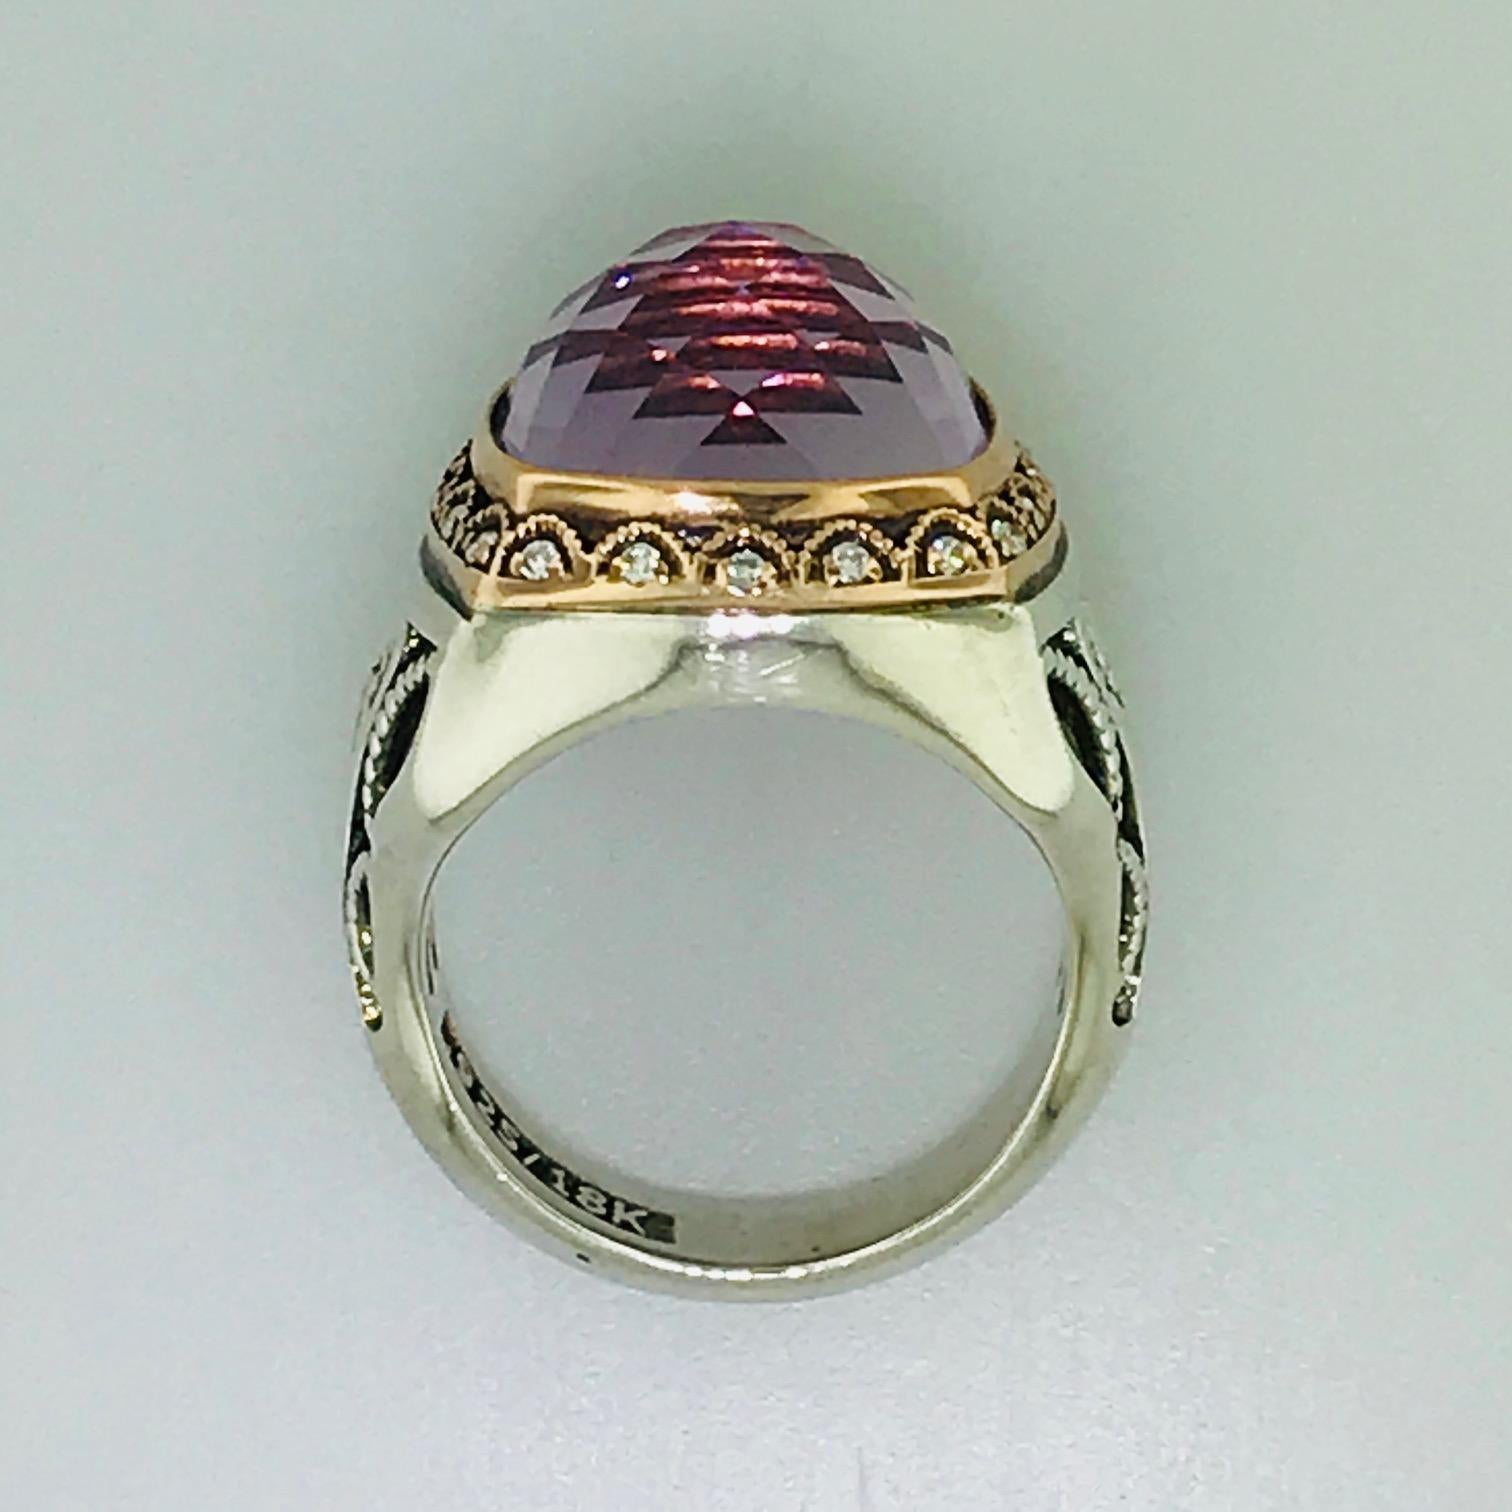 Tacori Rose de France Amethyst 18 Karat Gold and Sterling Silver Ring SR104P13 In New Condition For Sale In Austin, TX